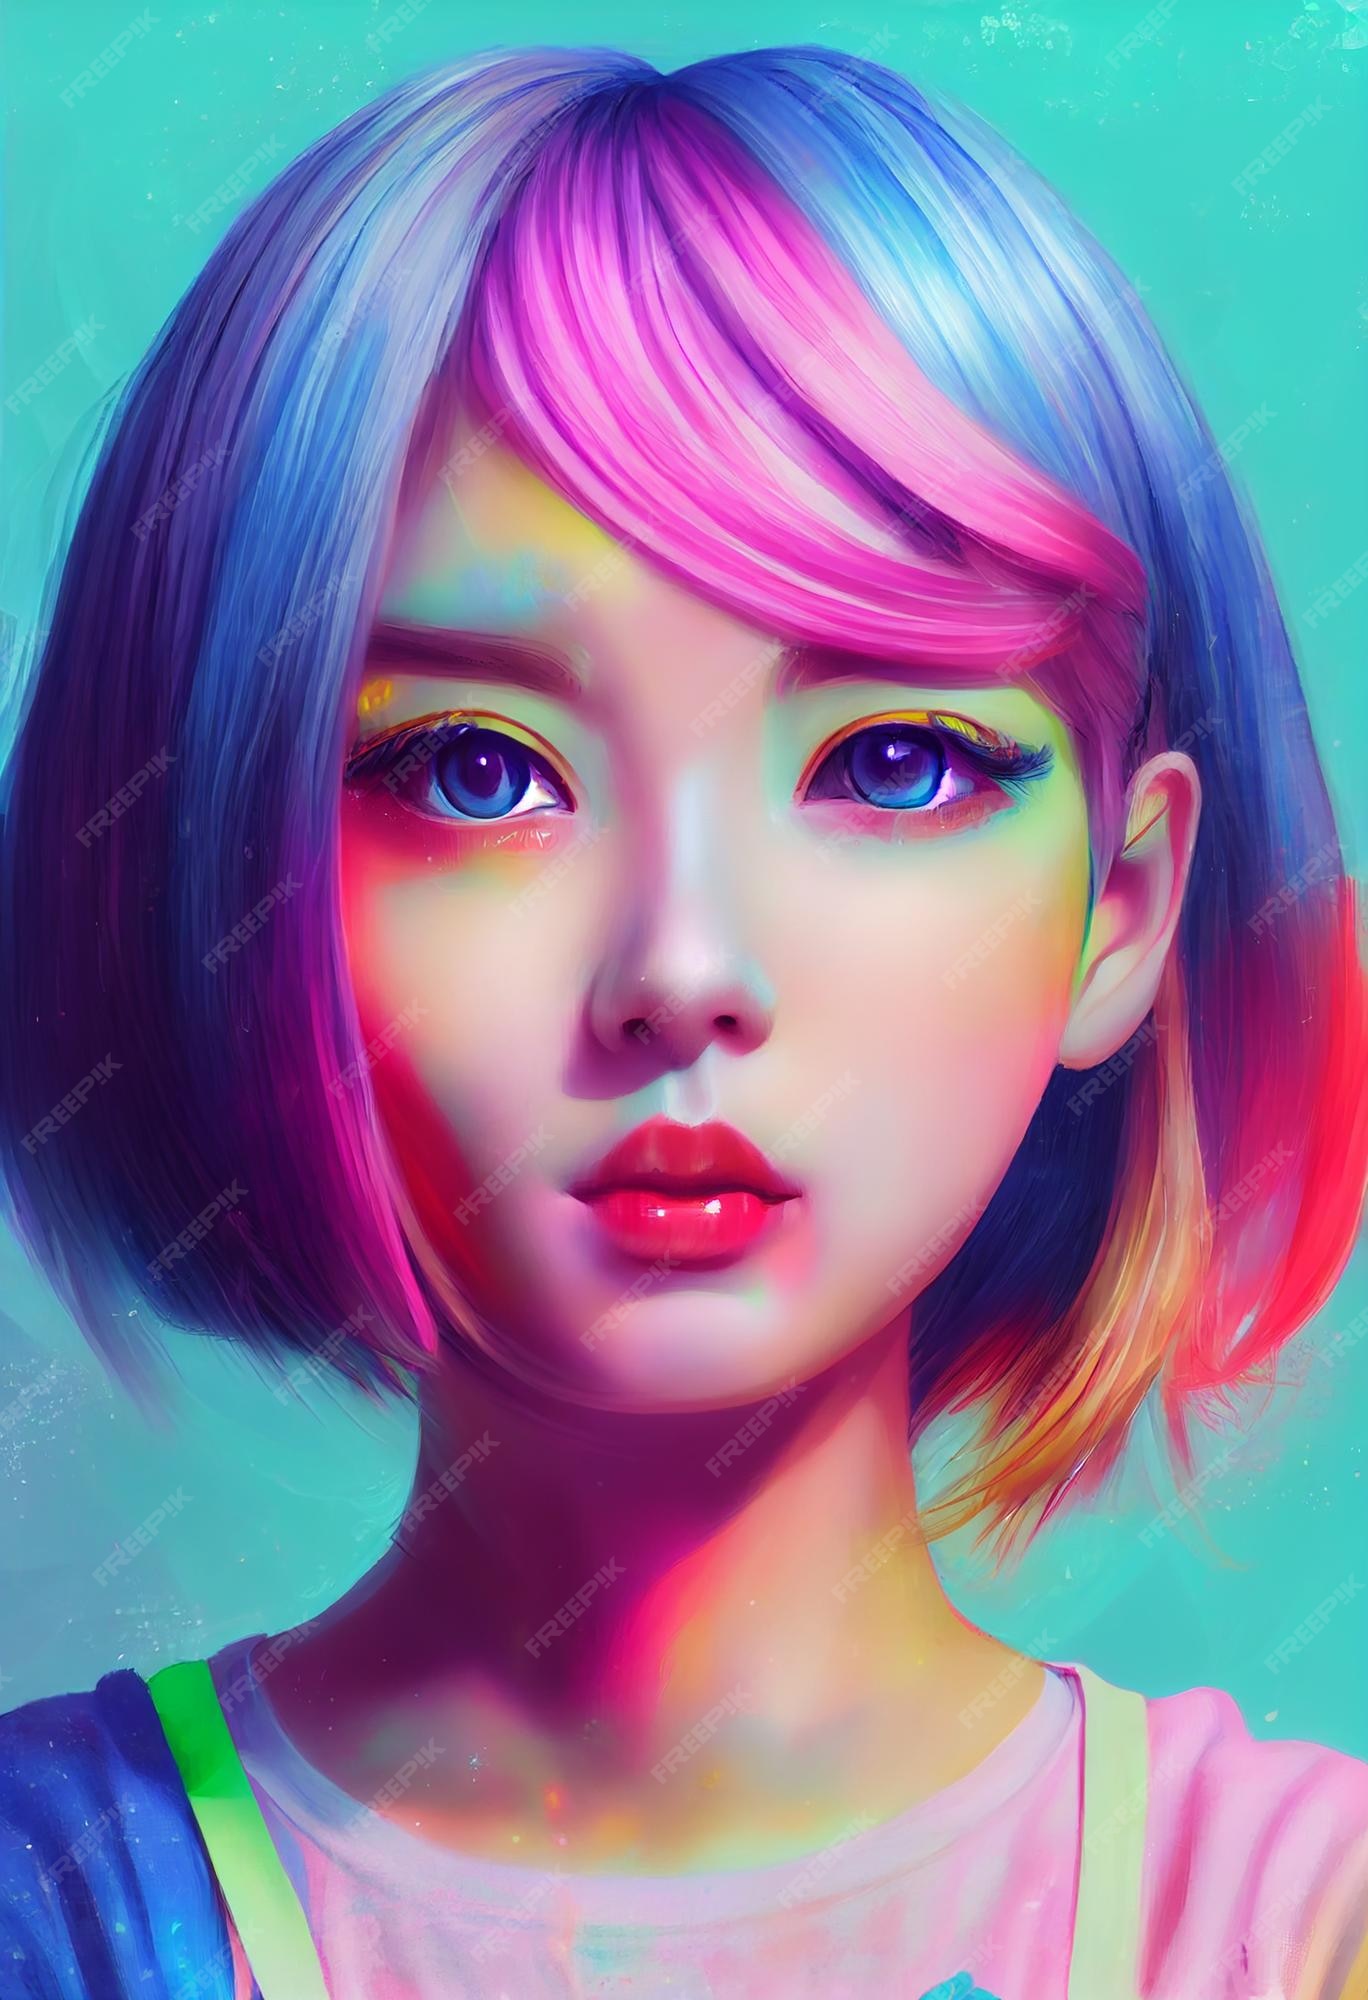 Premium Photo | Portrait beautiful anime girl for avatar and computer  graphic background 2d illustration